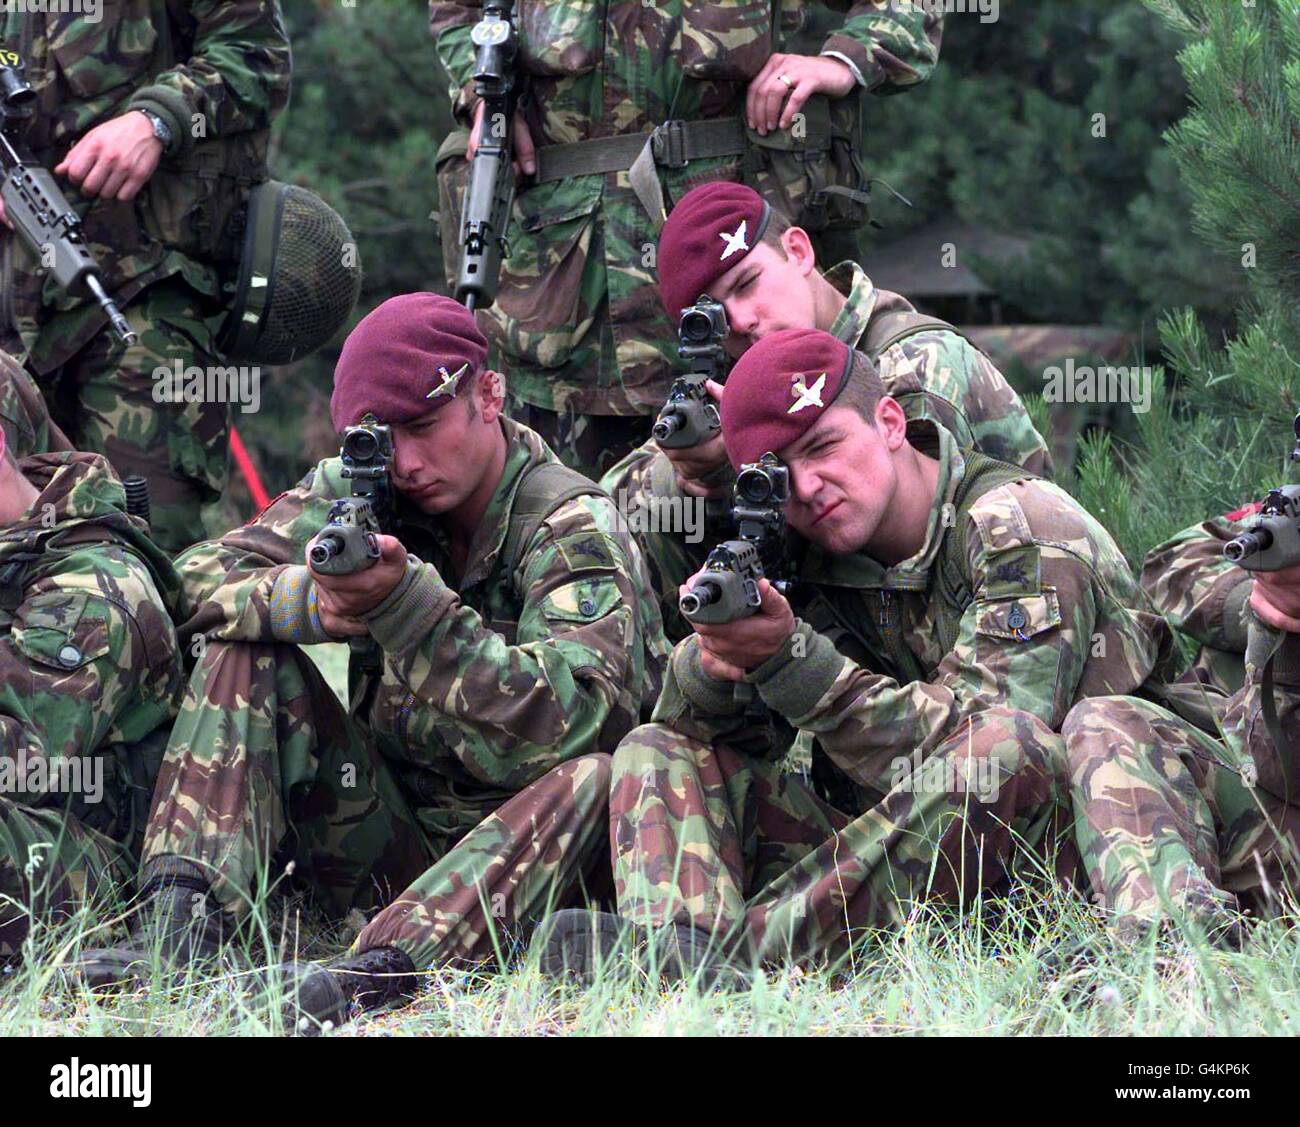 British Soldiers from the 1st Battalion, the Parachute Regiment train at the Petrovic Army Base, in Macedonia. They are amongst the forces that are prepared to move into Kosovo in the event of an agreement between Nato and Yugoslavia. Stock Photo